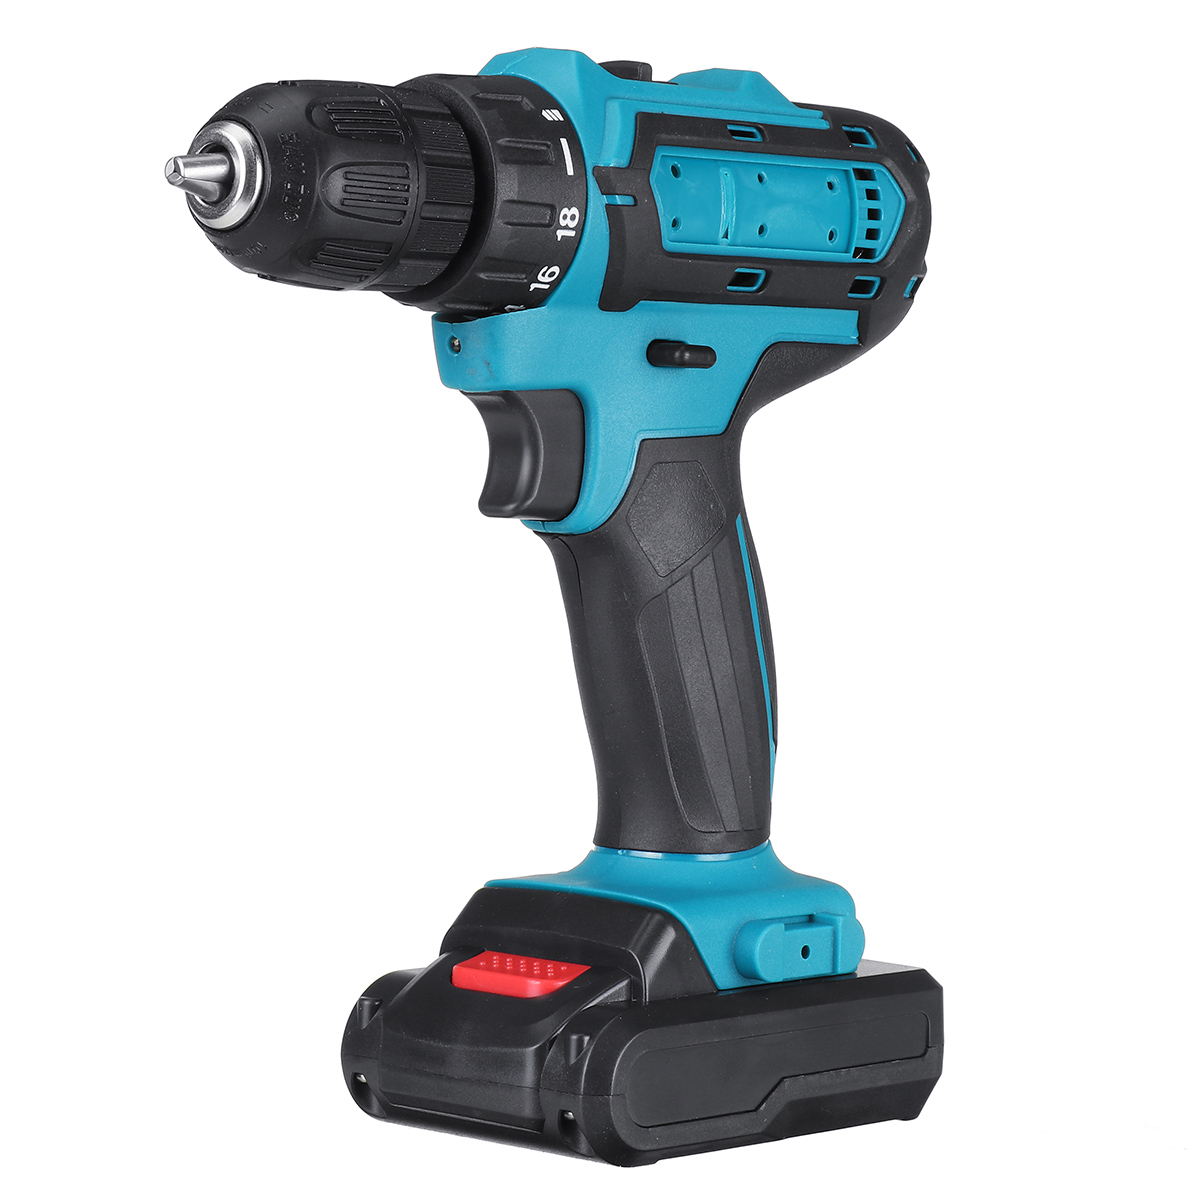 2000rpm-38Nm-21V-Lithium-Electric-Impact-Hammer-Drill-Wood-Drilling-Screwdrivers-with-Battery-1943477-15